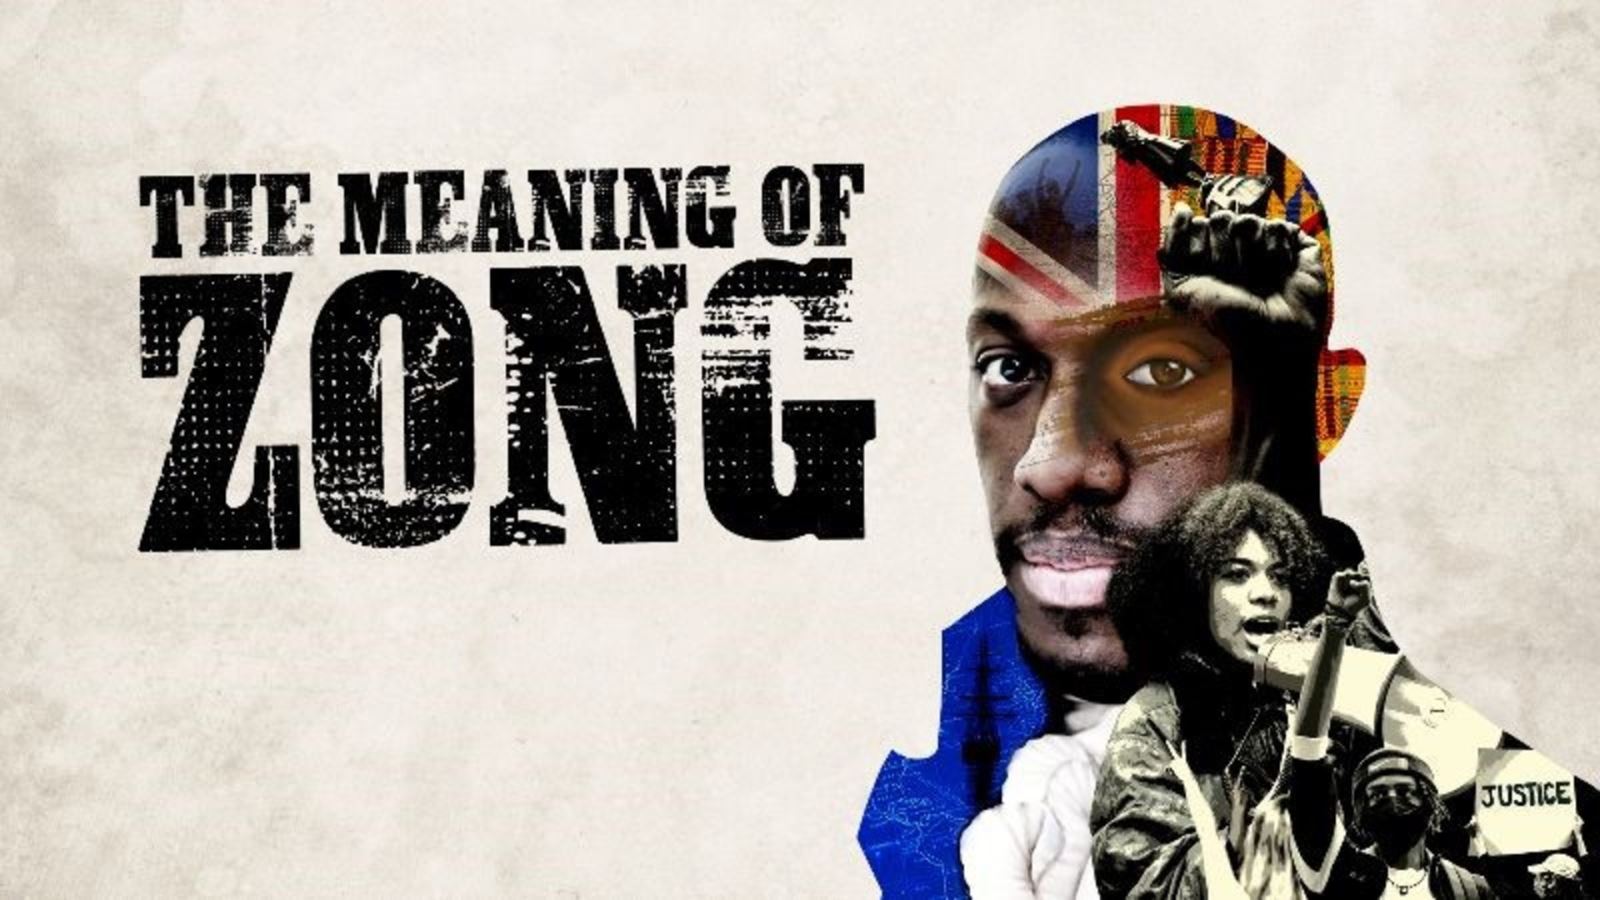 The Meaning of Zong poster